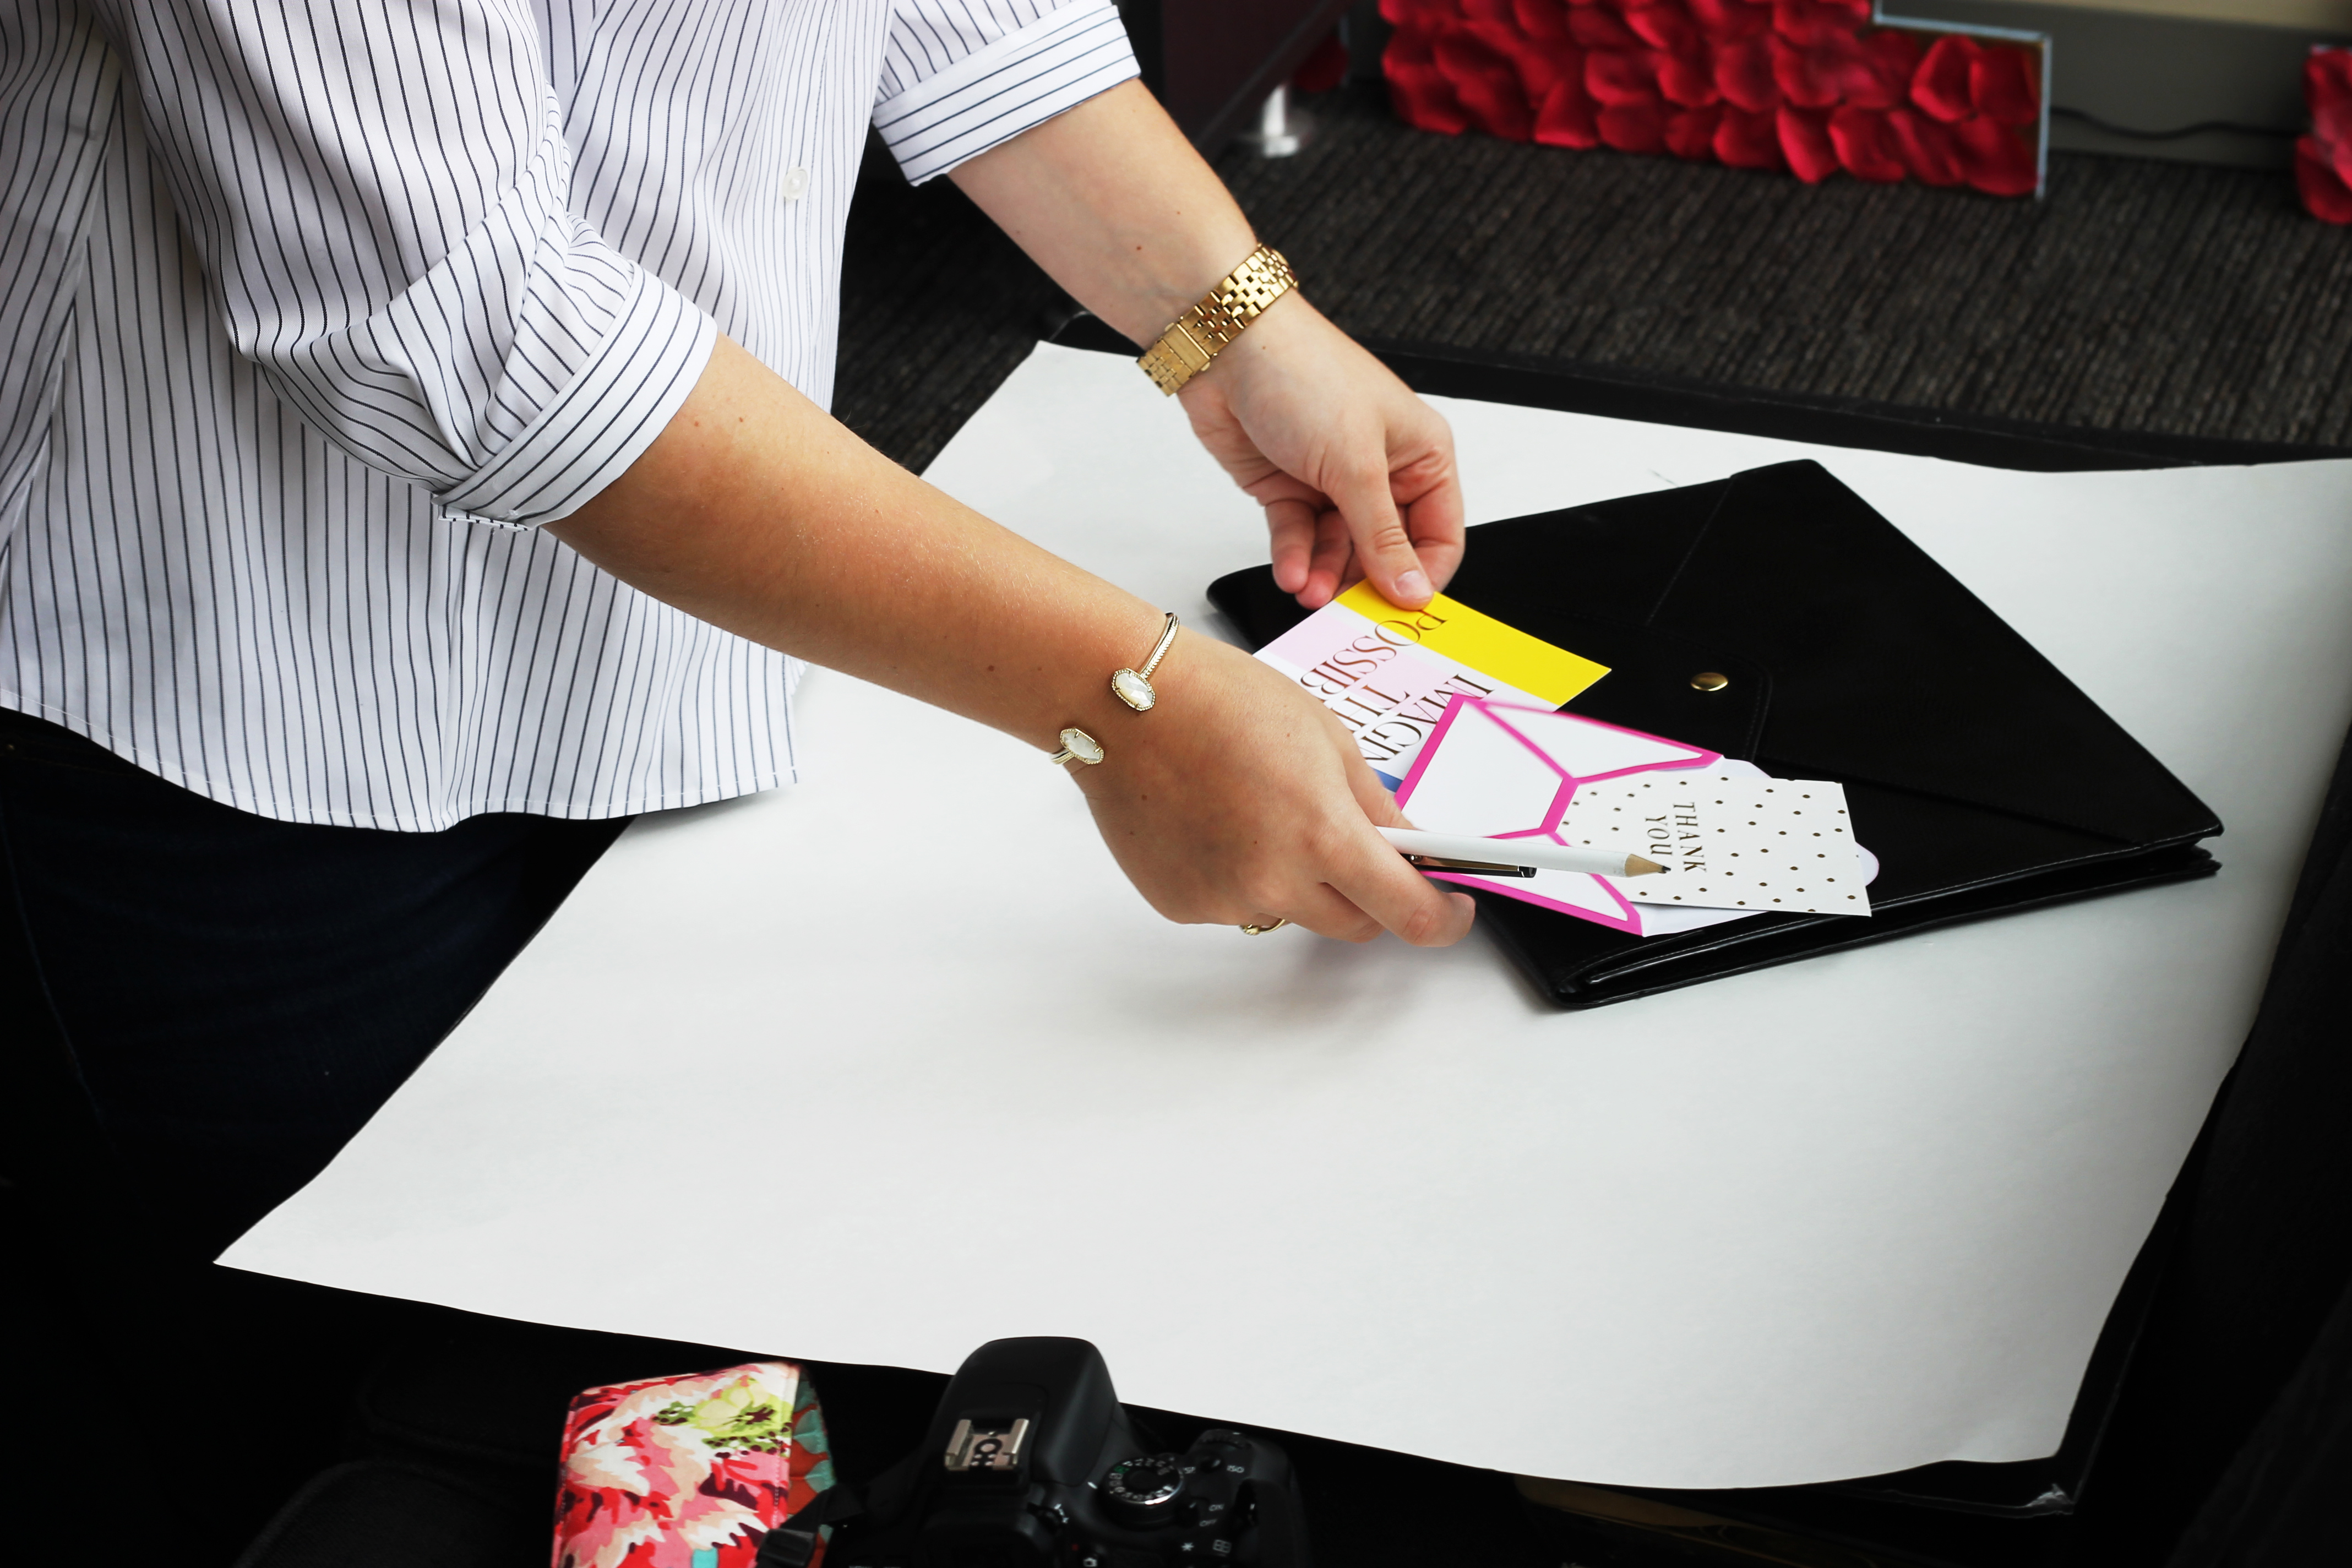 She owns plain-colored posterboards to get that clean, sleek background for her shots.